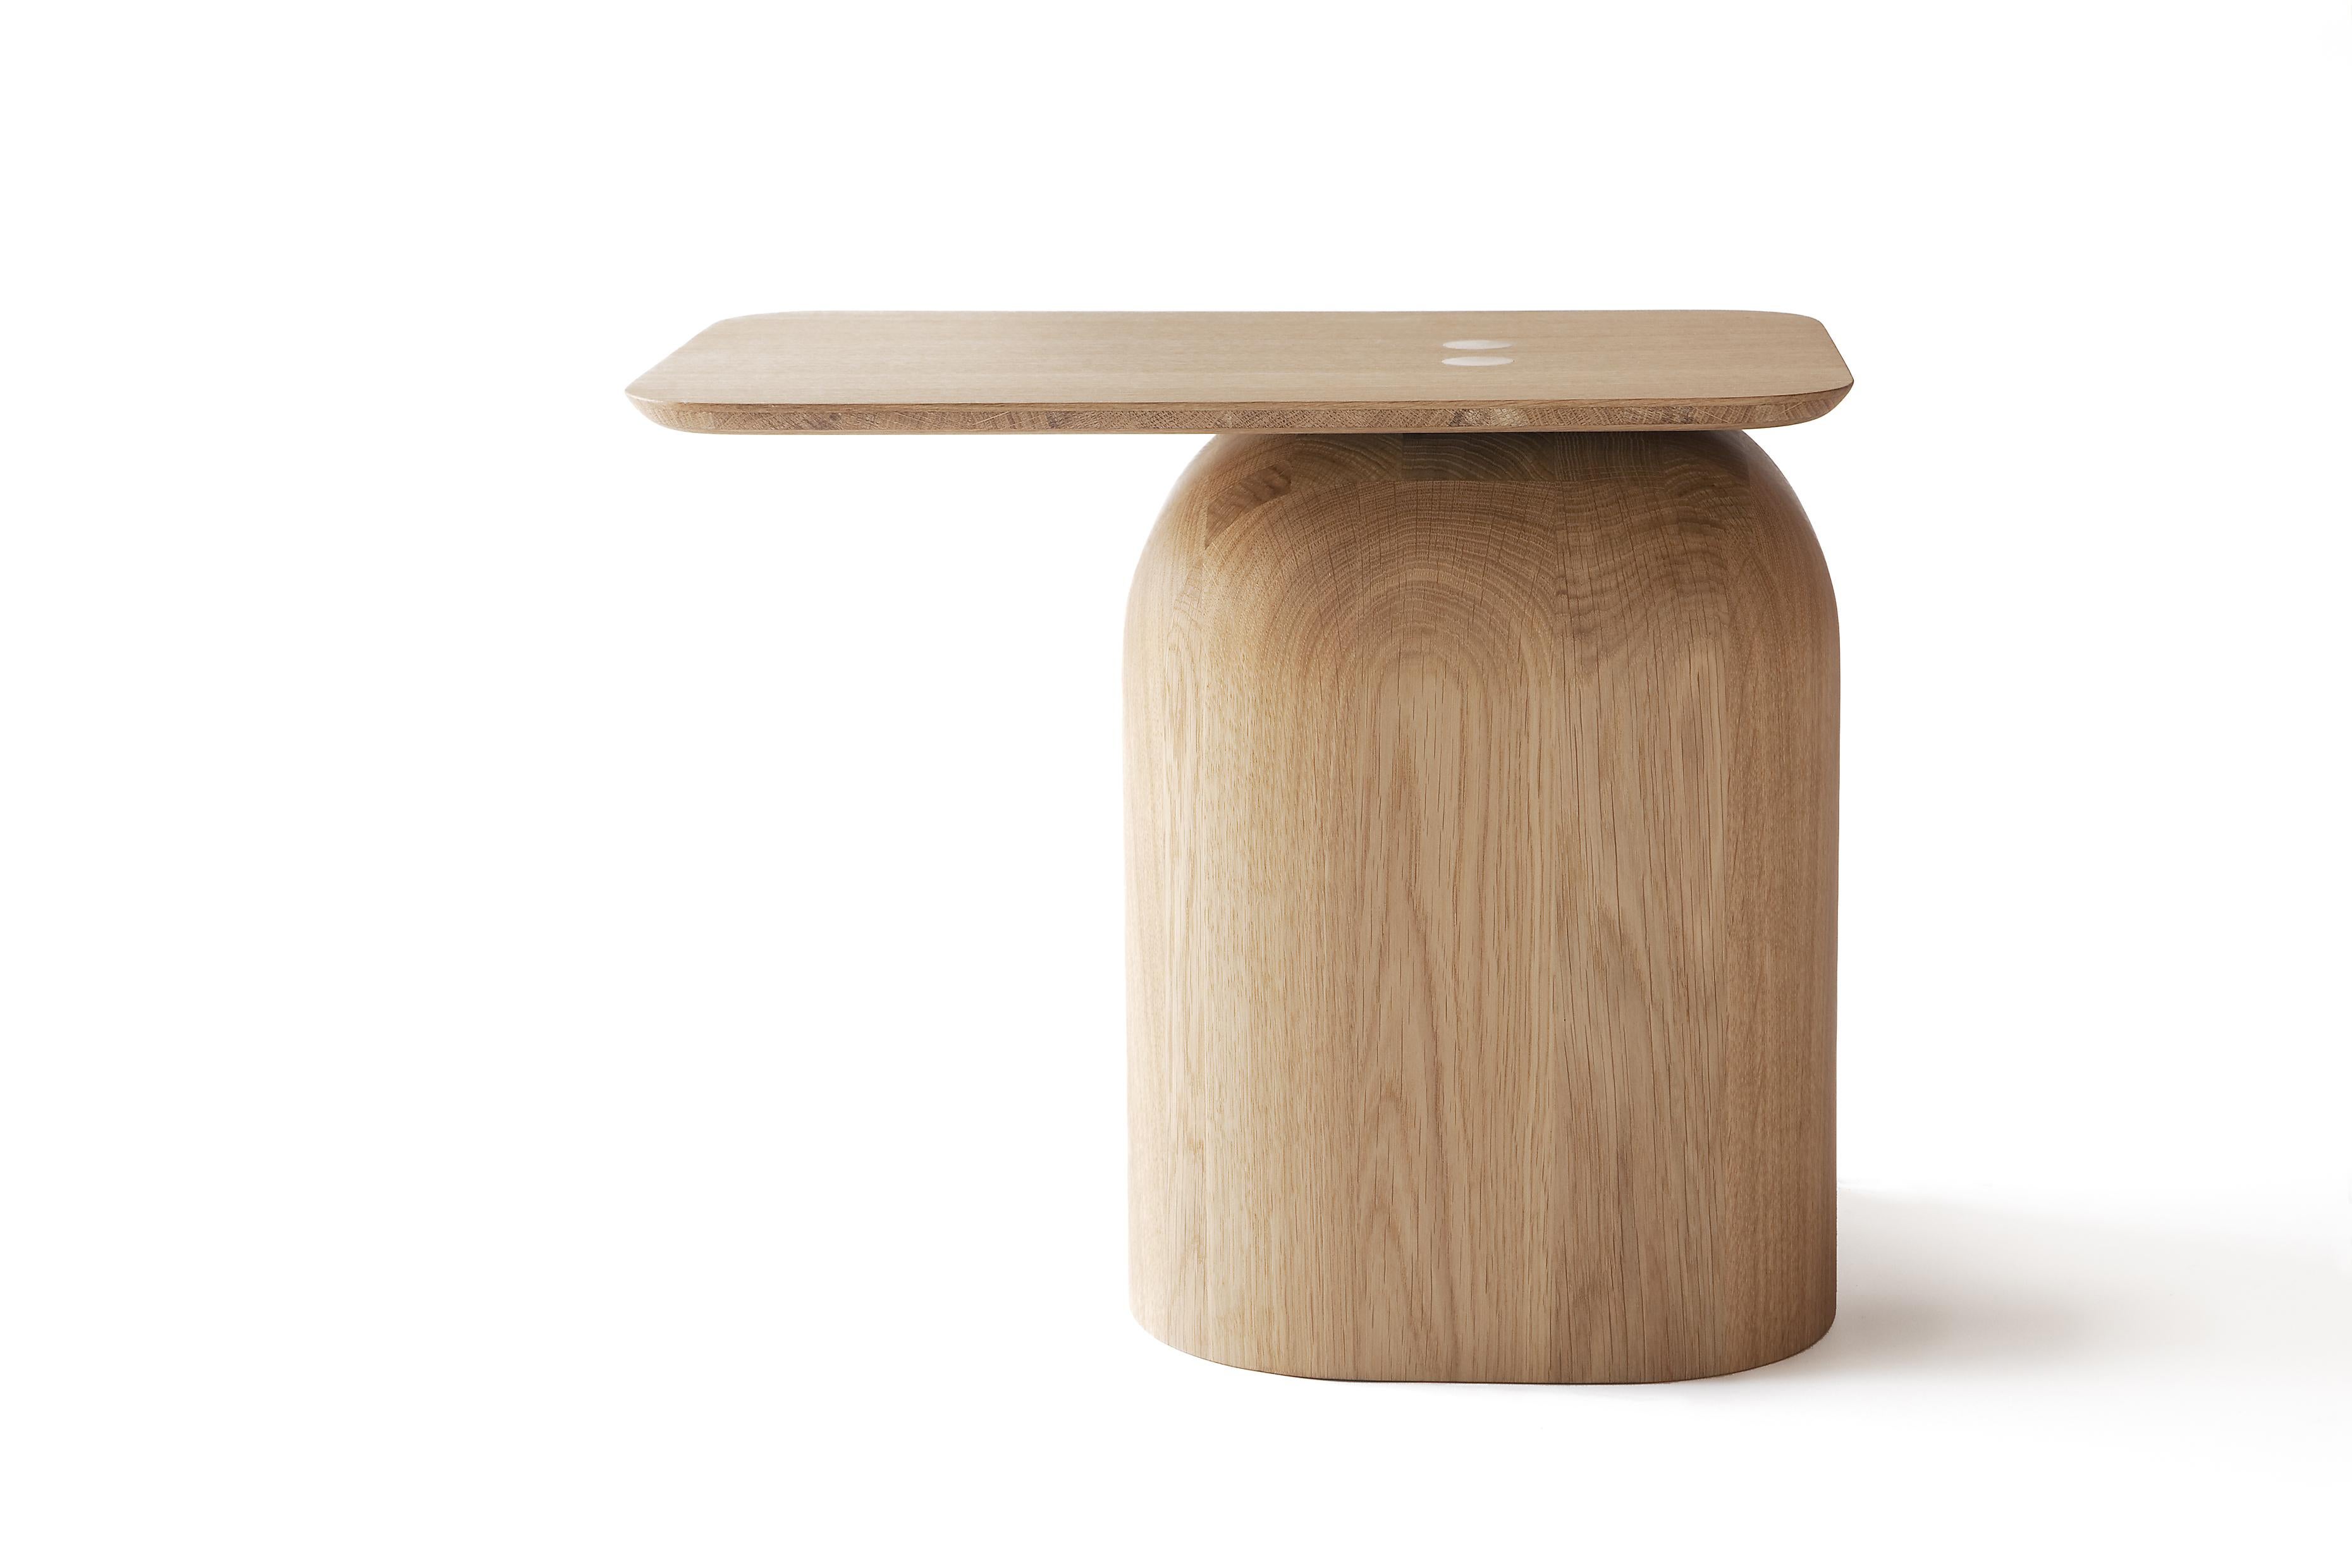 The April table set was designed by Swiss designer Alfredo Häberli in 2012. The massive wooden base is harmoniously combined with the tabletop by traditional wooden joinery. 

The tables are made of different wood species: birch, ash, and oak.